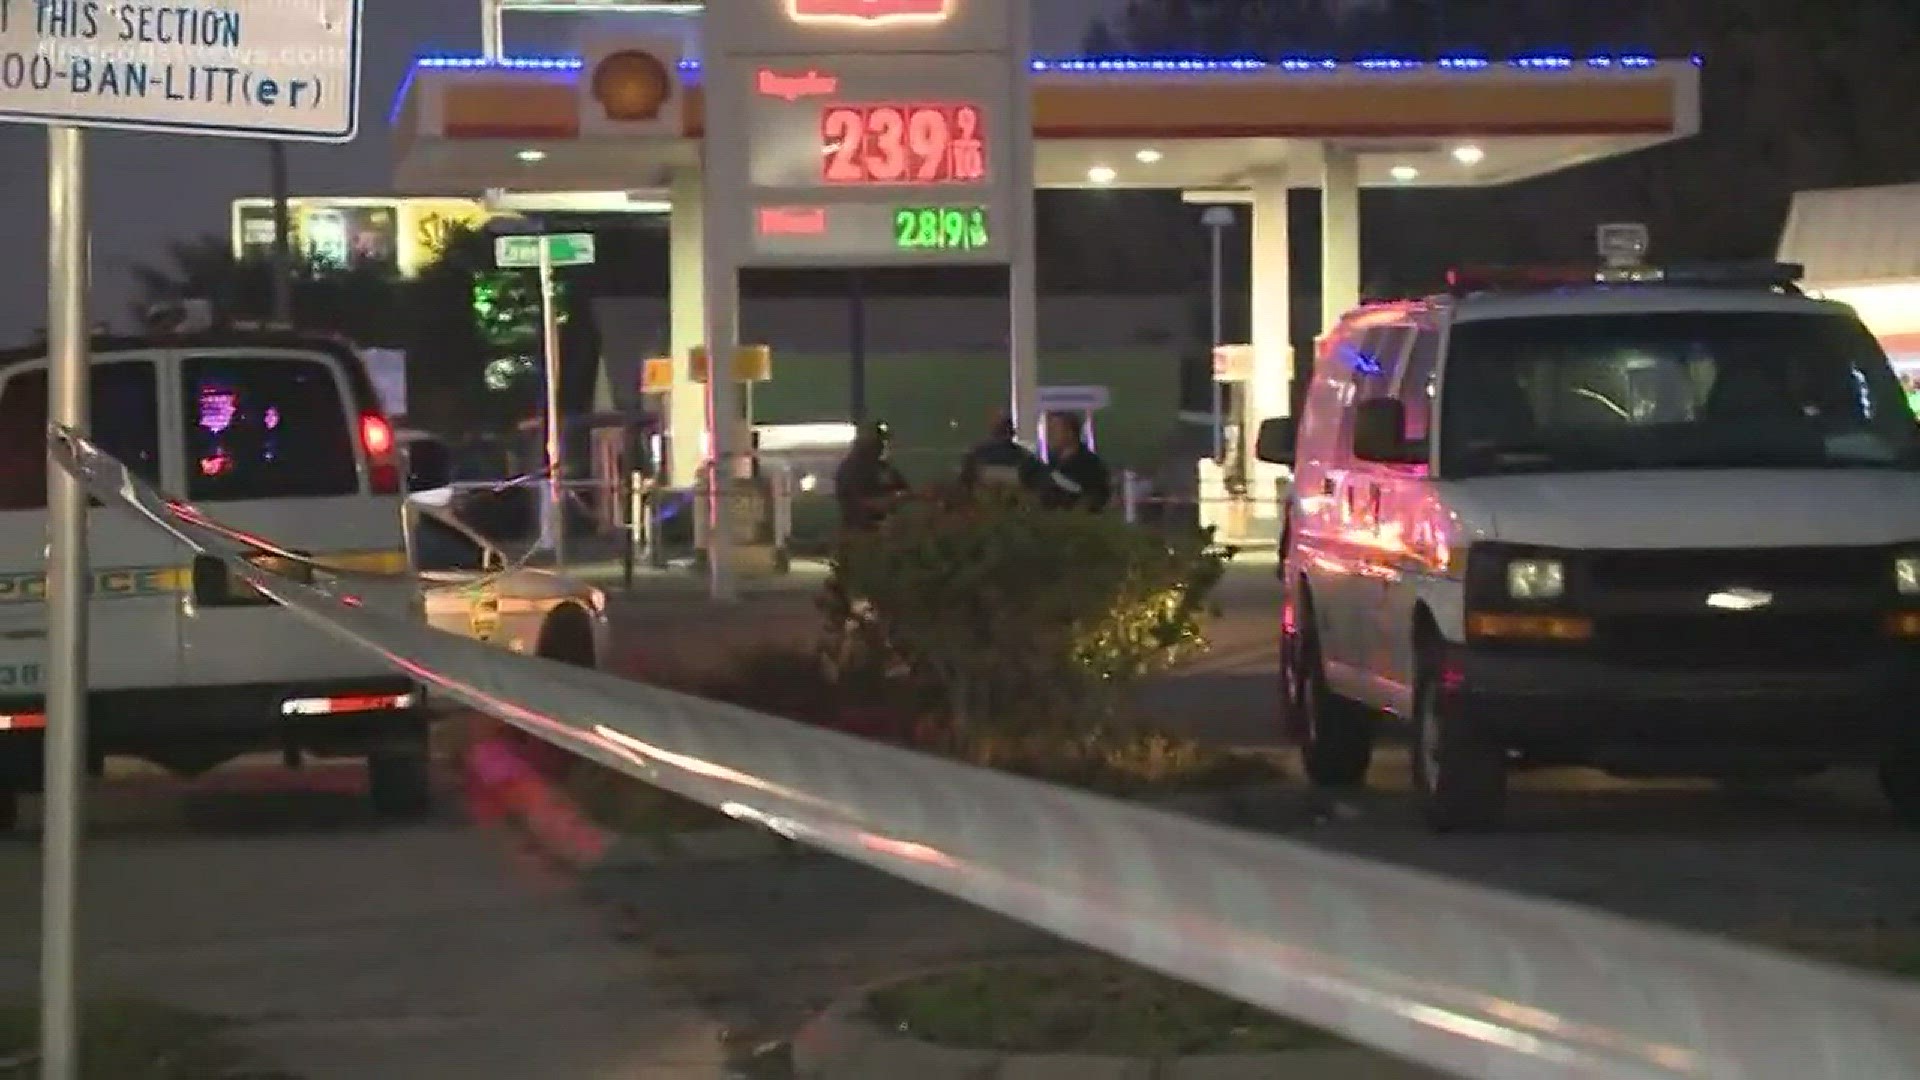 A man in his 60s has been killed in a shooting on the Westside outside a gas station.